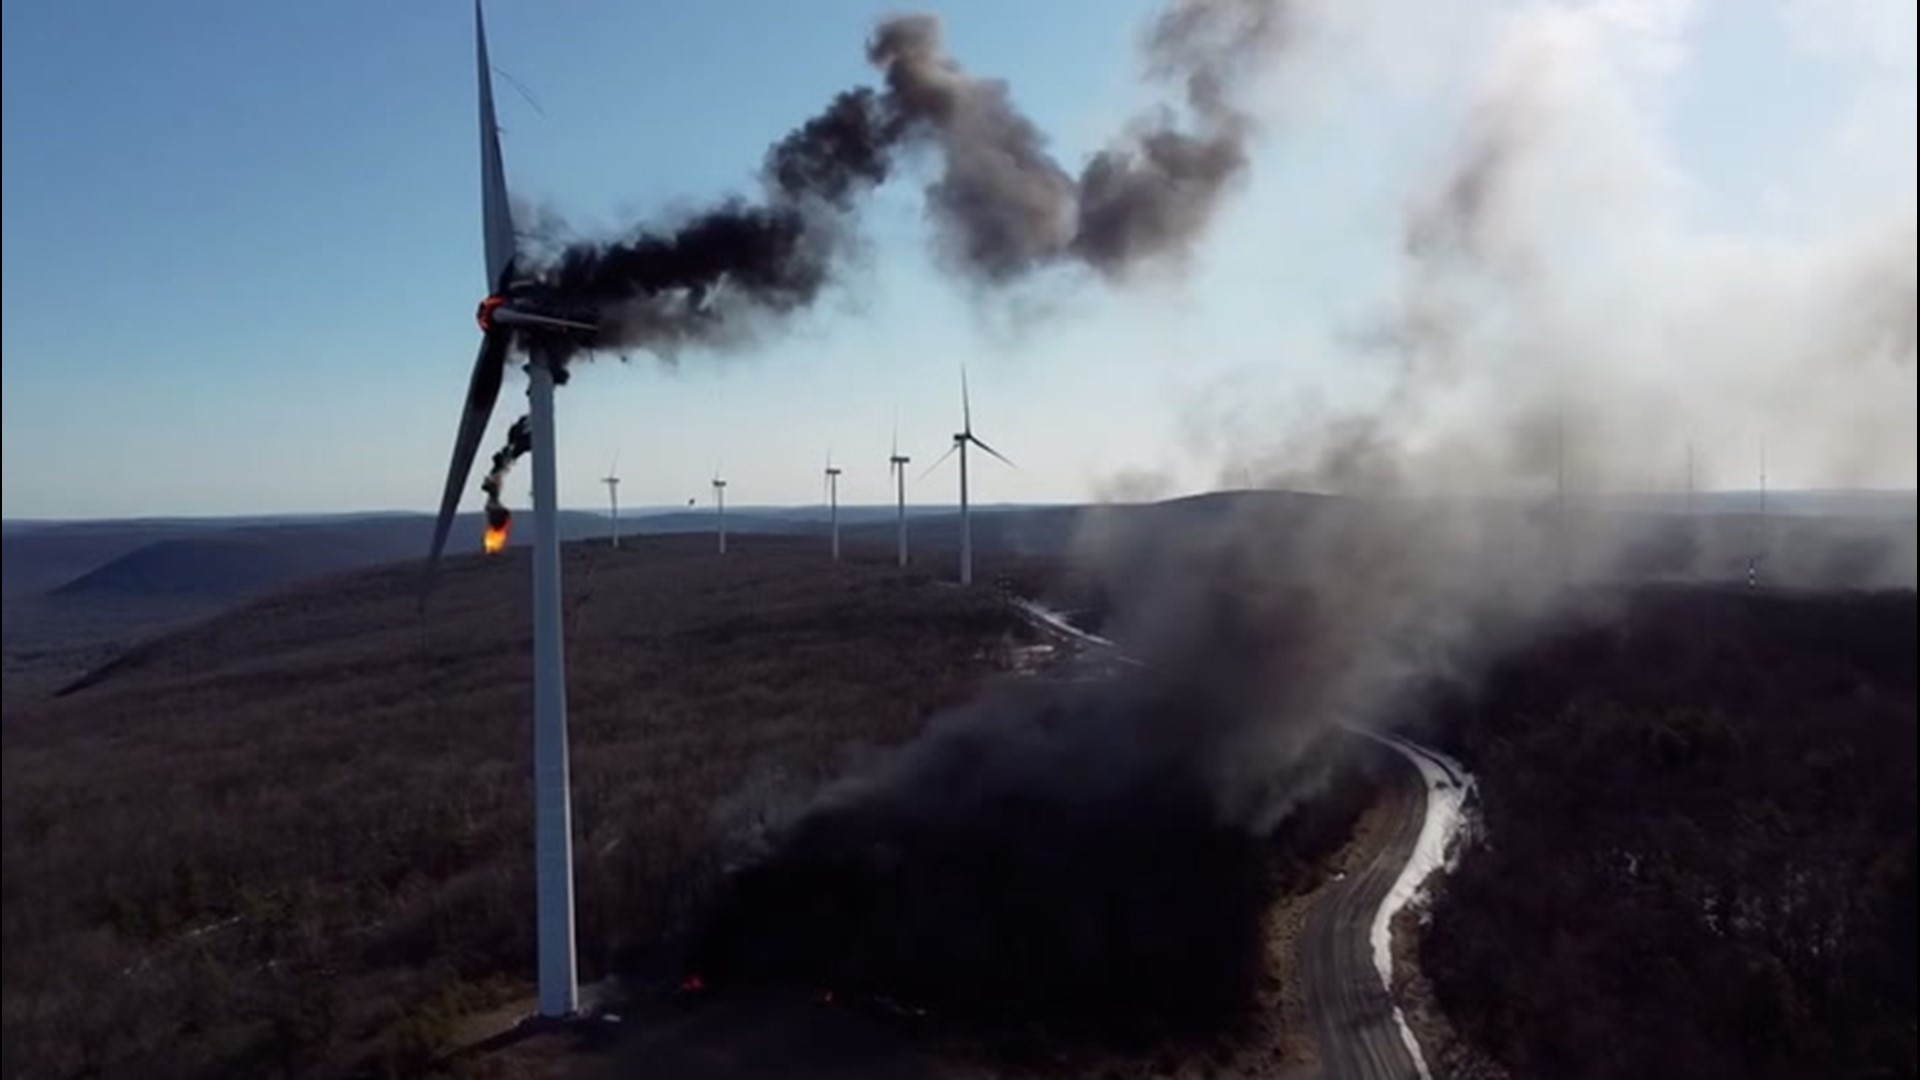 A wind turbine in Mahanoy City, Pennsylvania, caught on fire on March 13. Firefighters say it burned out on its own without causing brush fires.